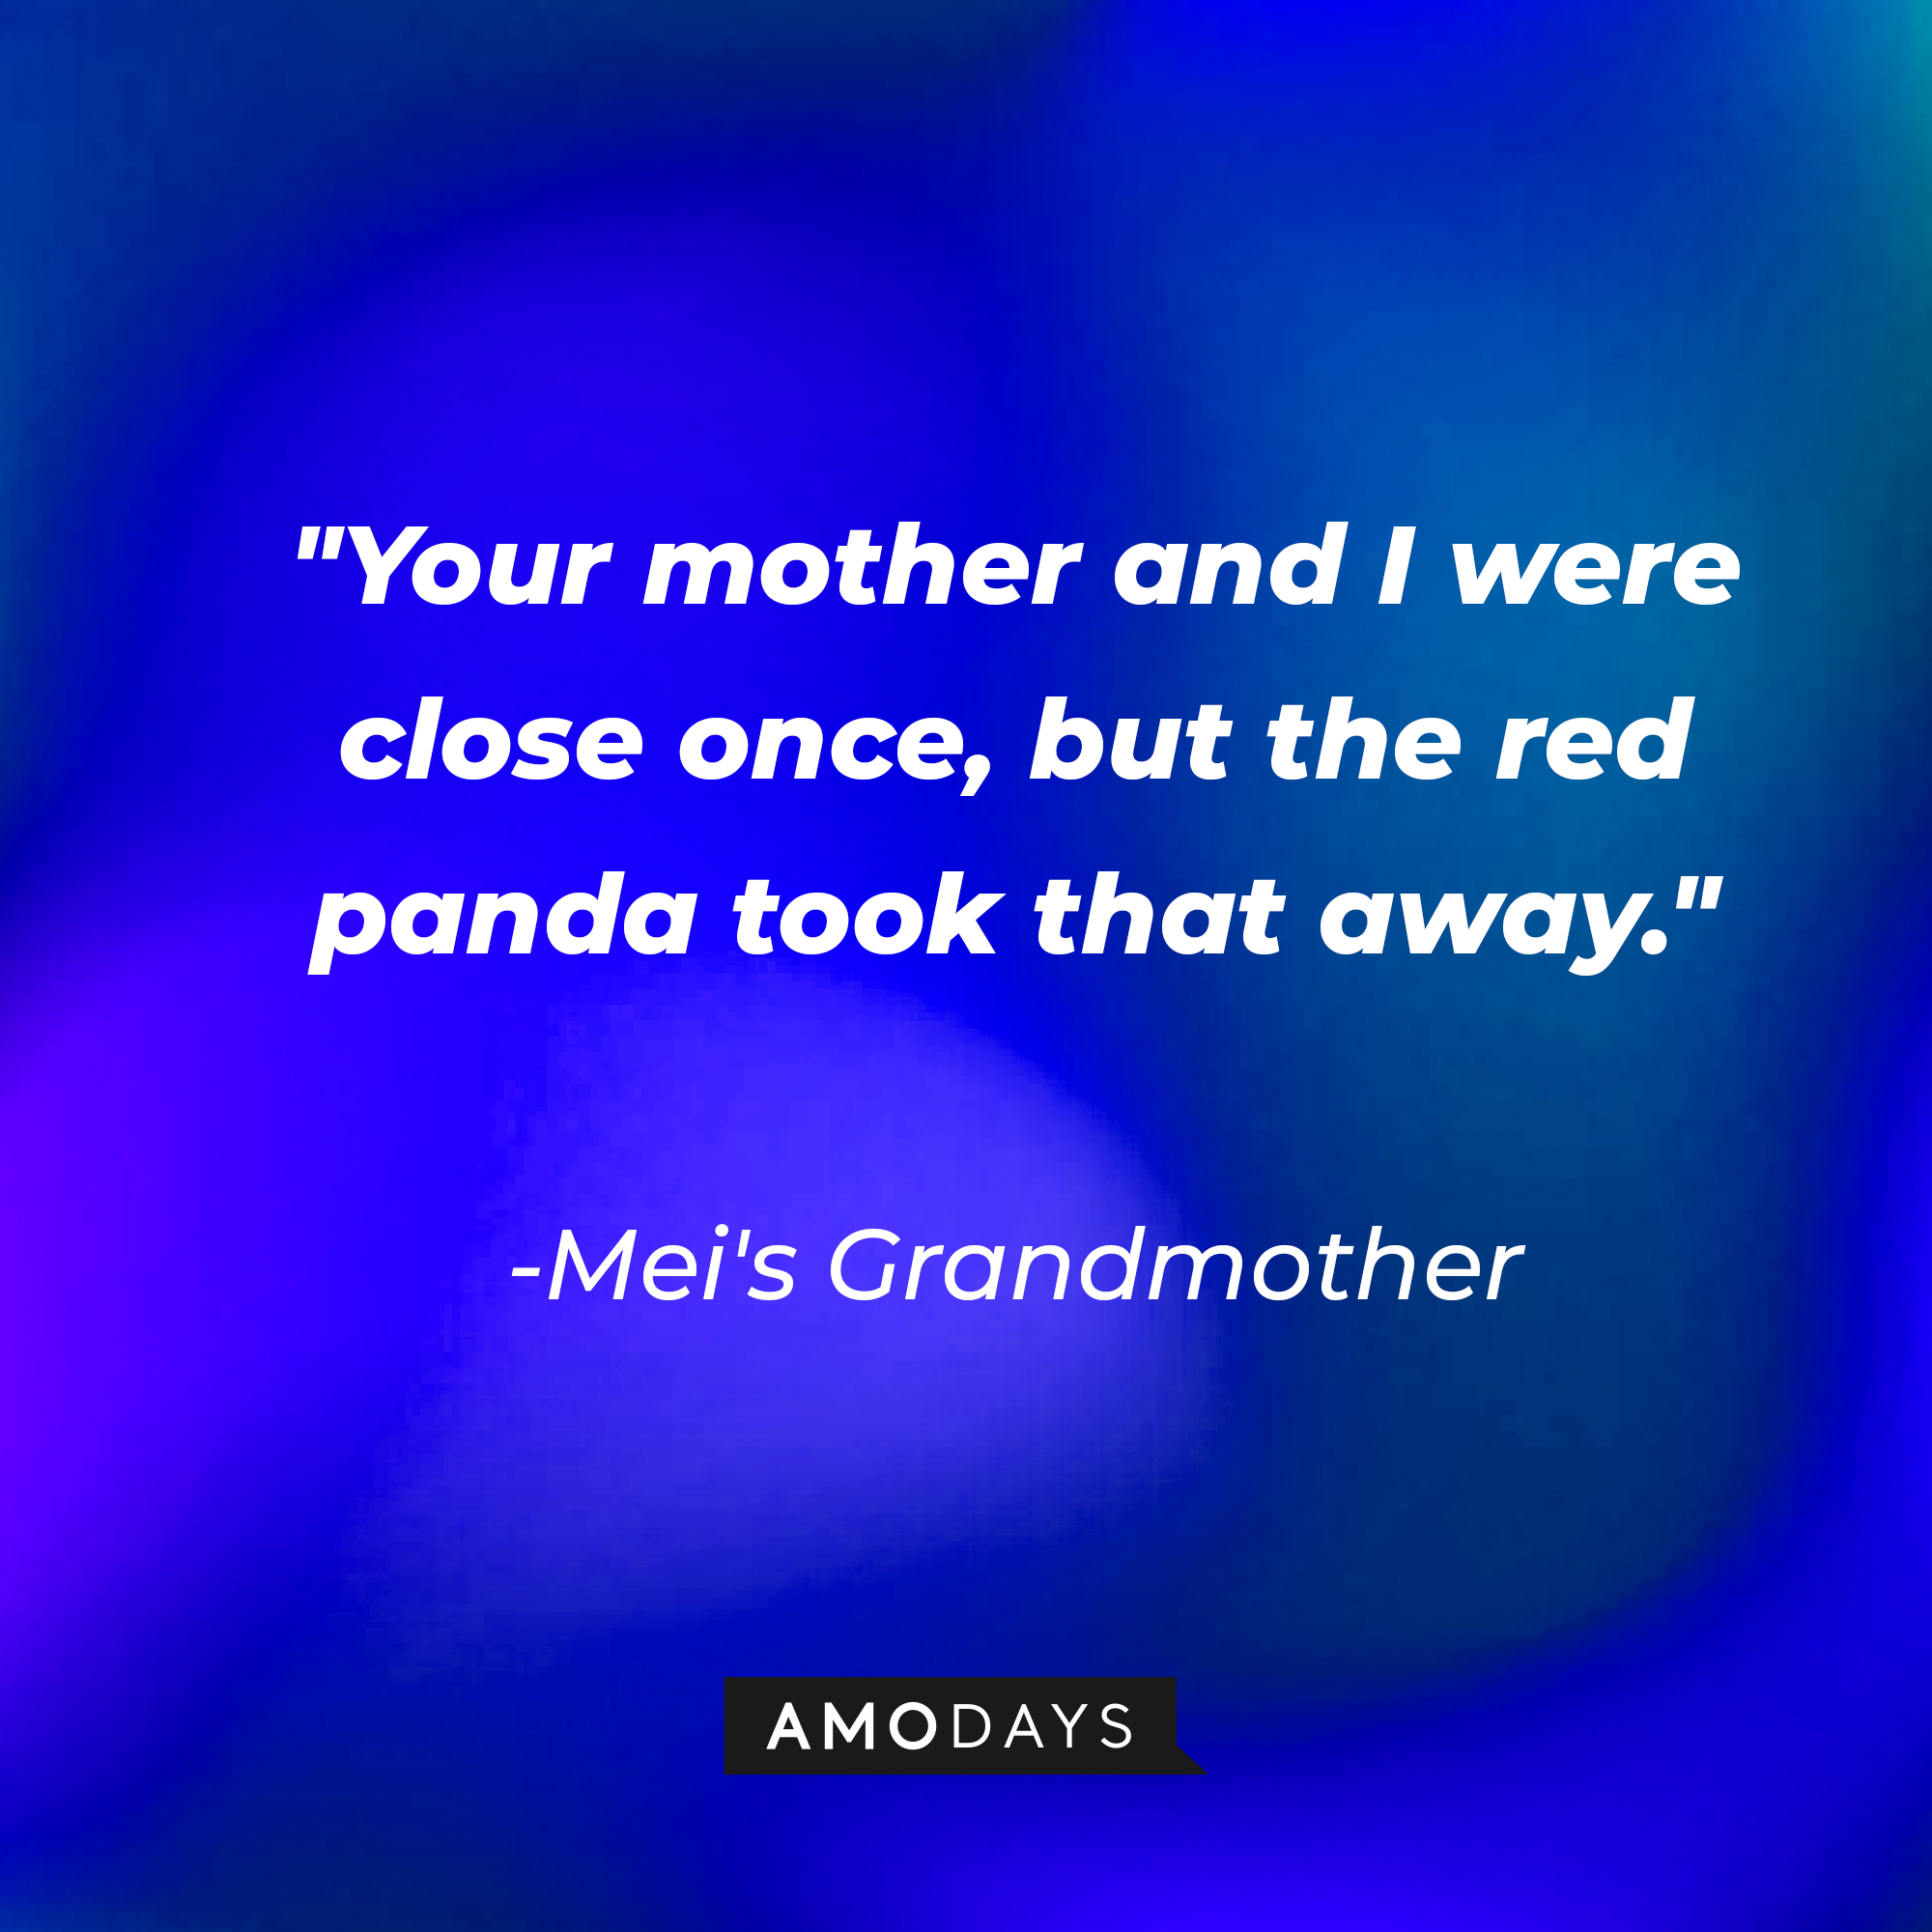 Mei's Grandmother's quote: "Your mother and I were close once, but the red panda took that away." | Source: AmoDays